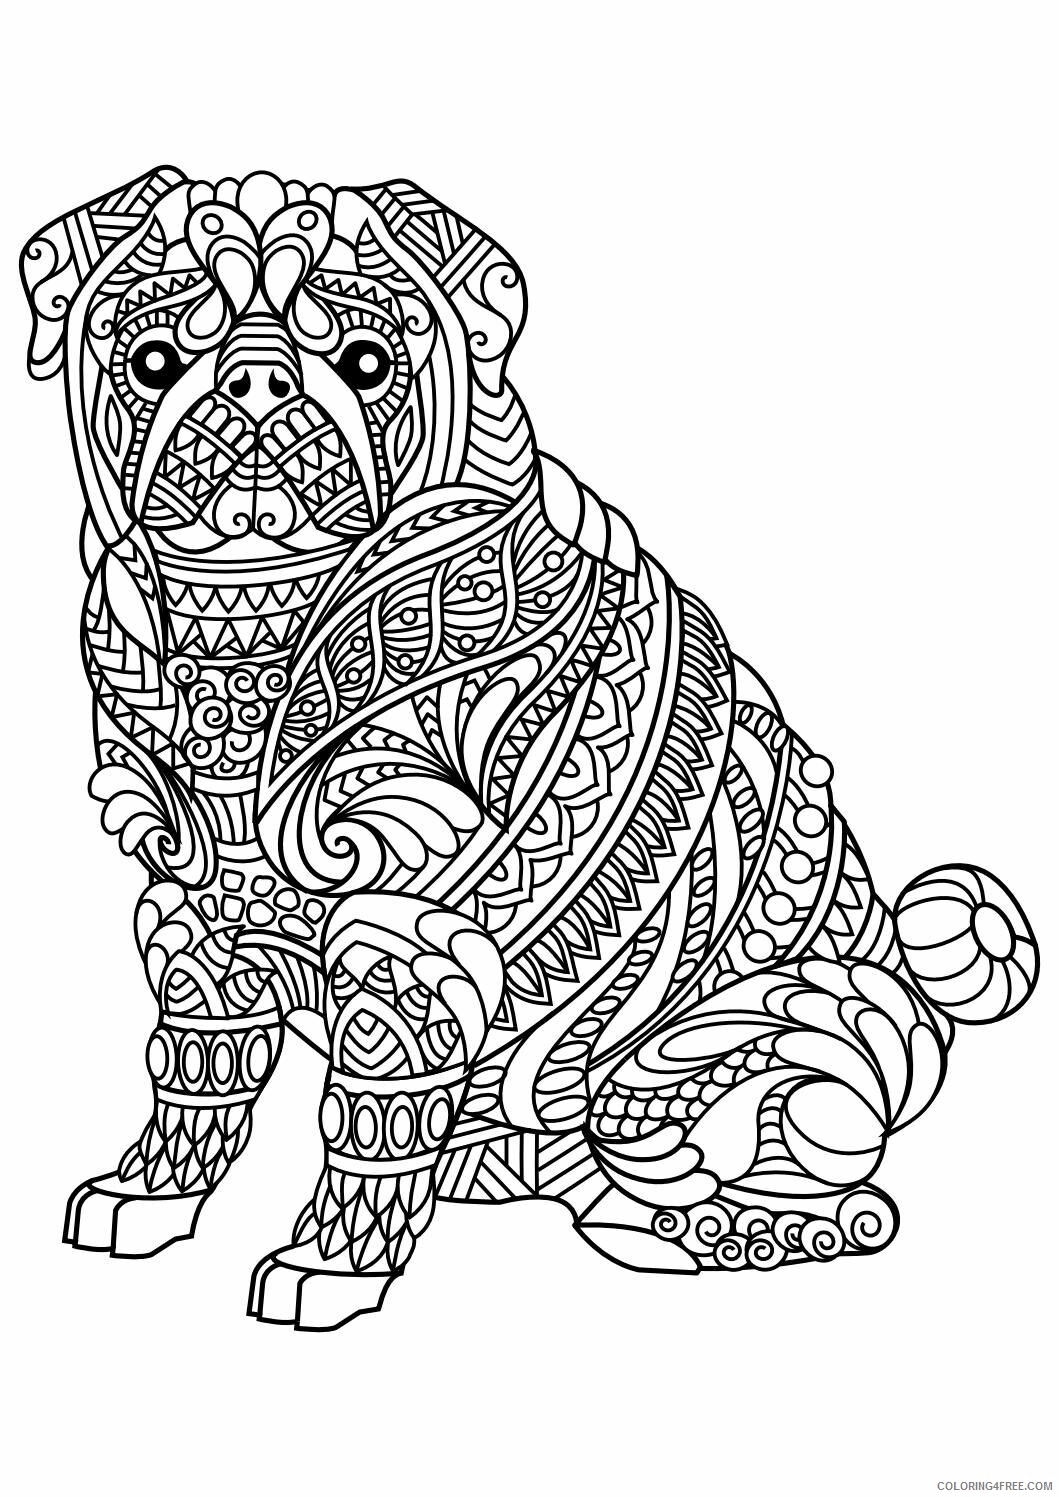 Adult Animals Coloring Pages Pug Animal for Adults Printable 2020 168 Coloring4free